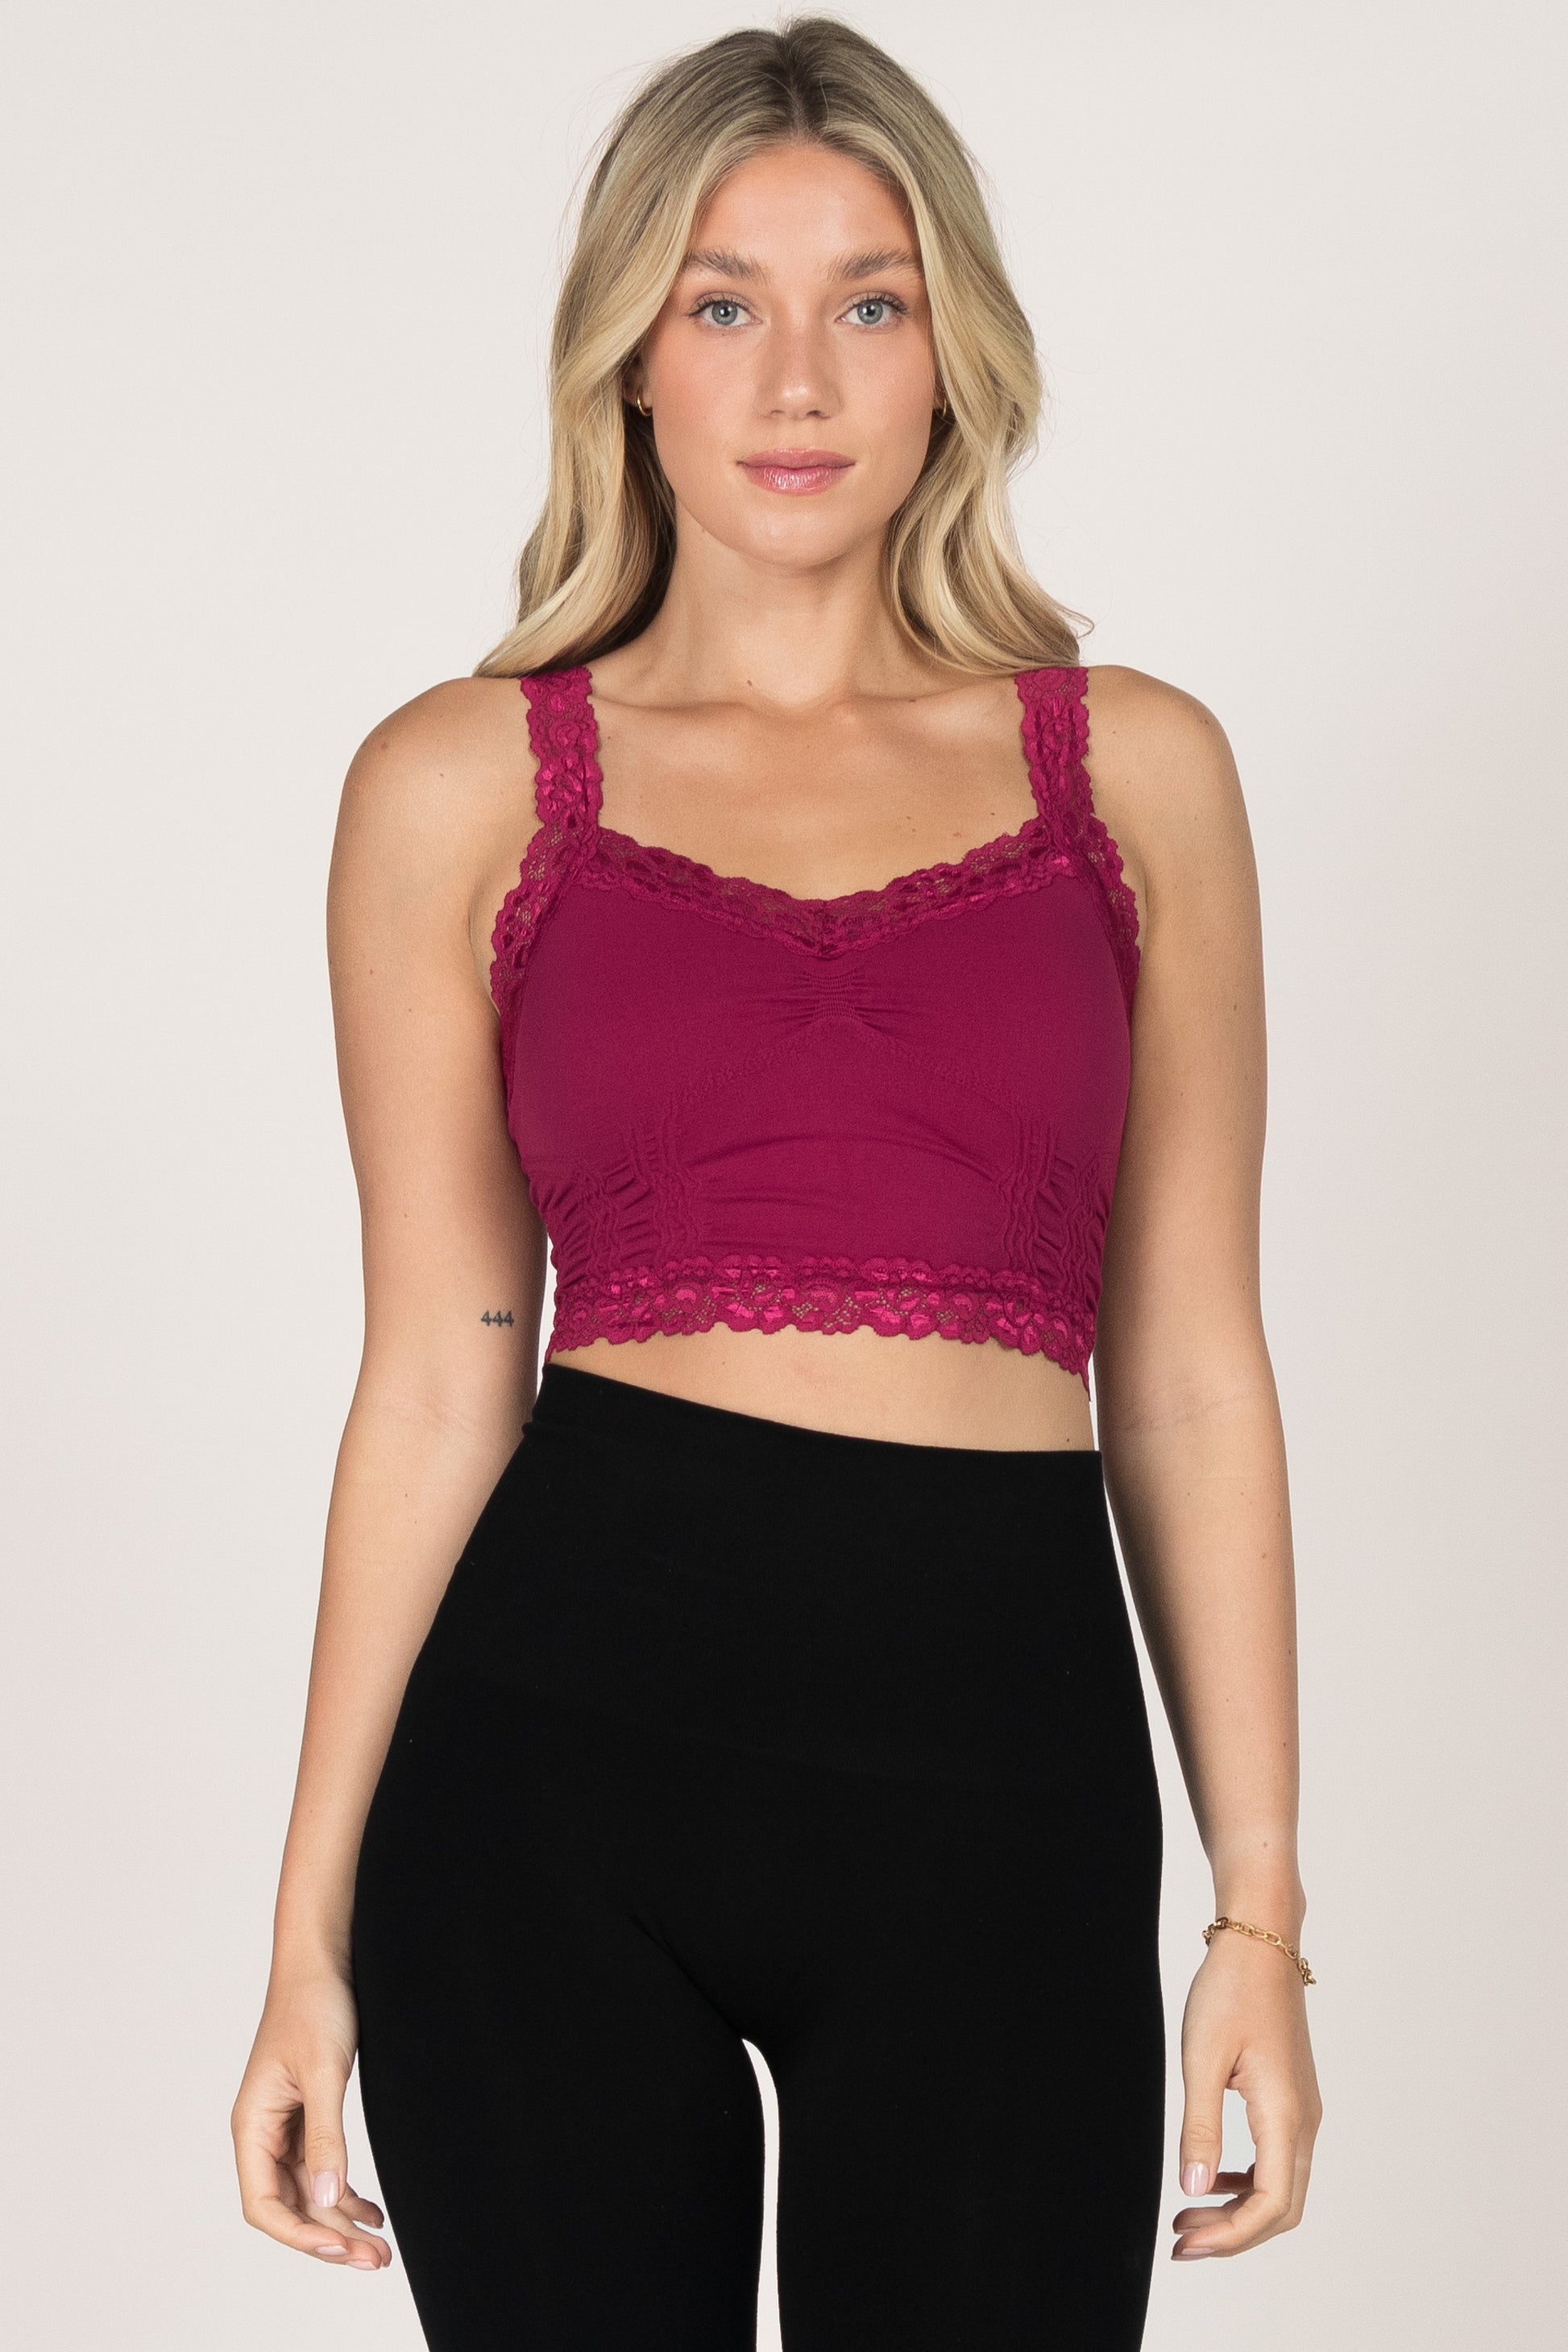 Lace Bralette, Cami Crop Top Stylish and Versatile Summer Essential,  Racerback, Adjustable Strap, Lining, Resort, Lounge, Casual Sexy Gift -   Denmark